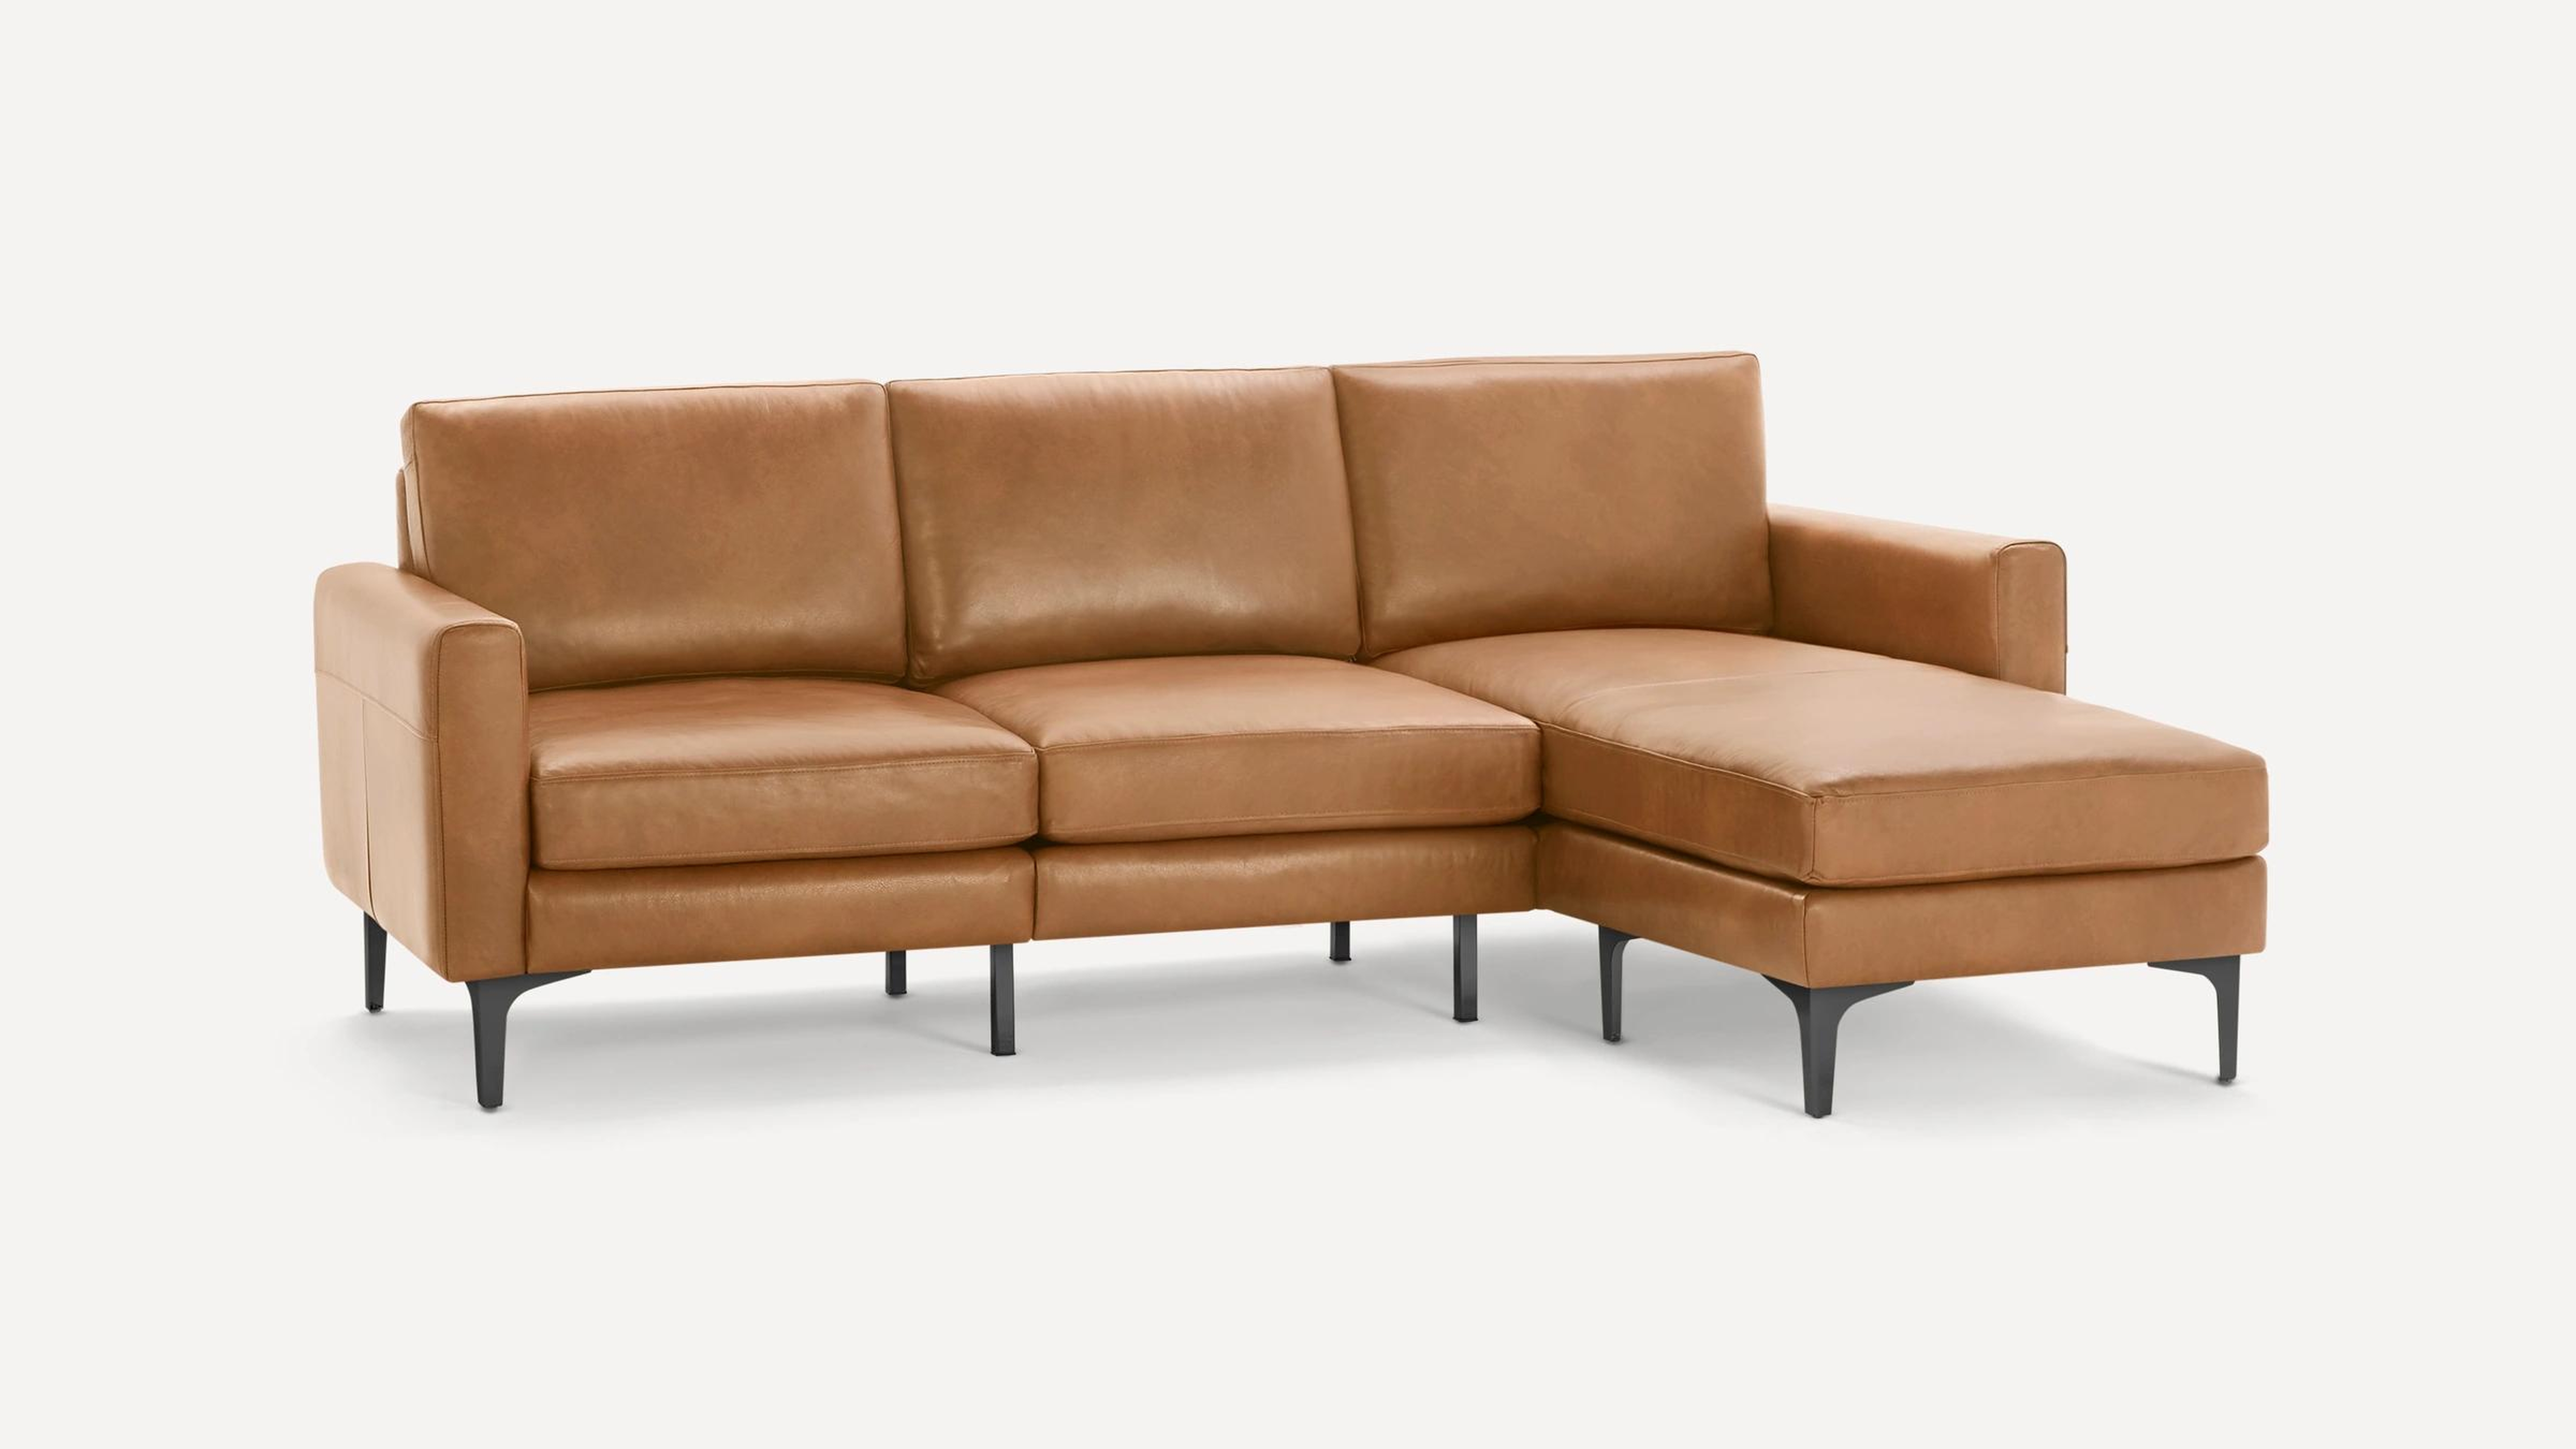 Nomad Leather Sectional in Camel, Black Metal Legs - Burrow